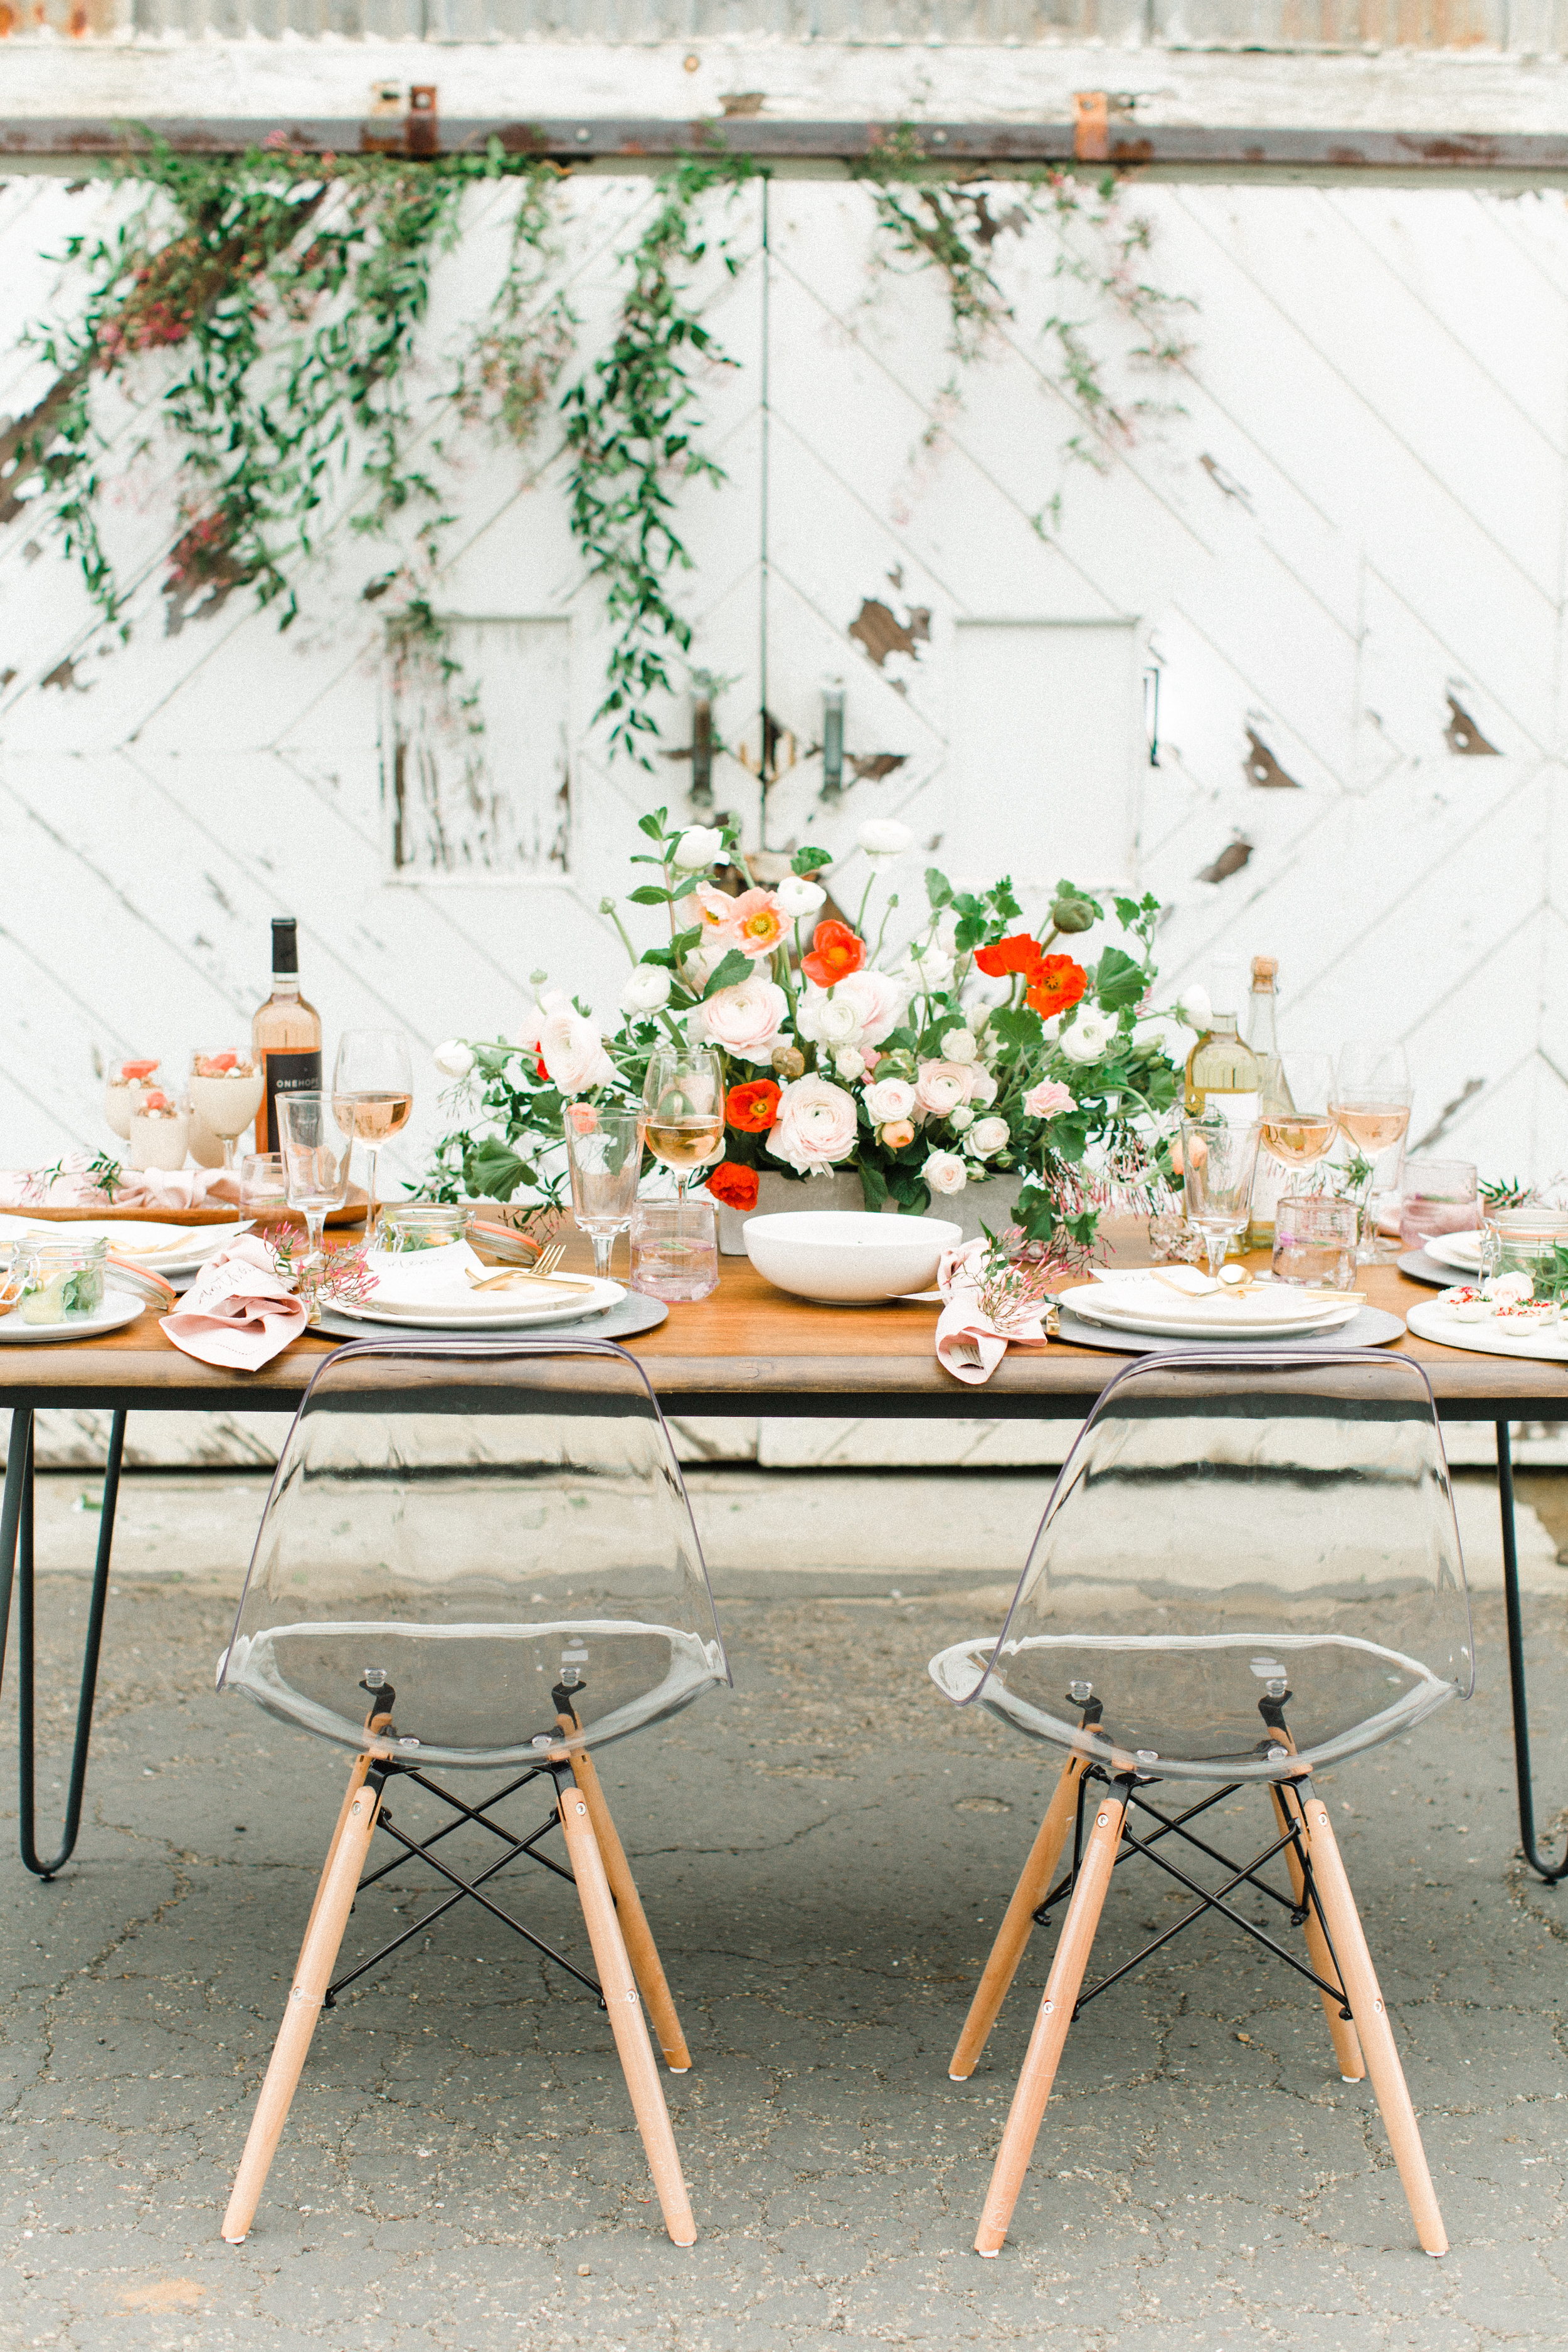 How to Host an Outdoor Easter Brunch